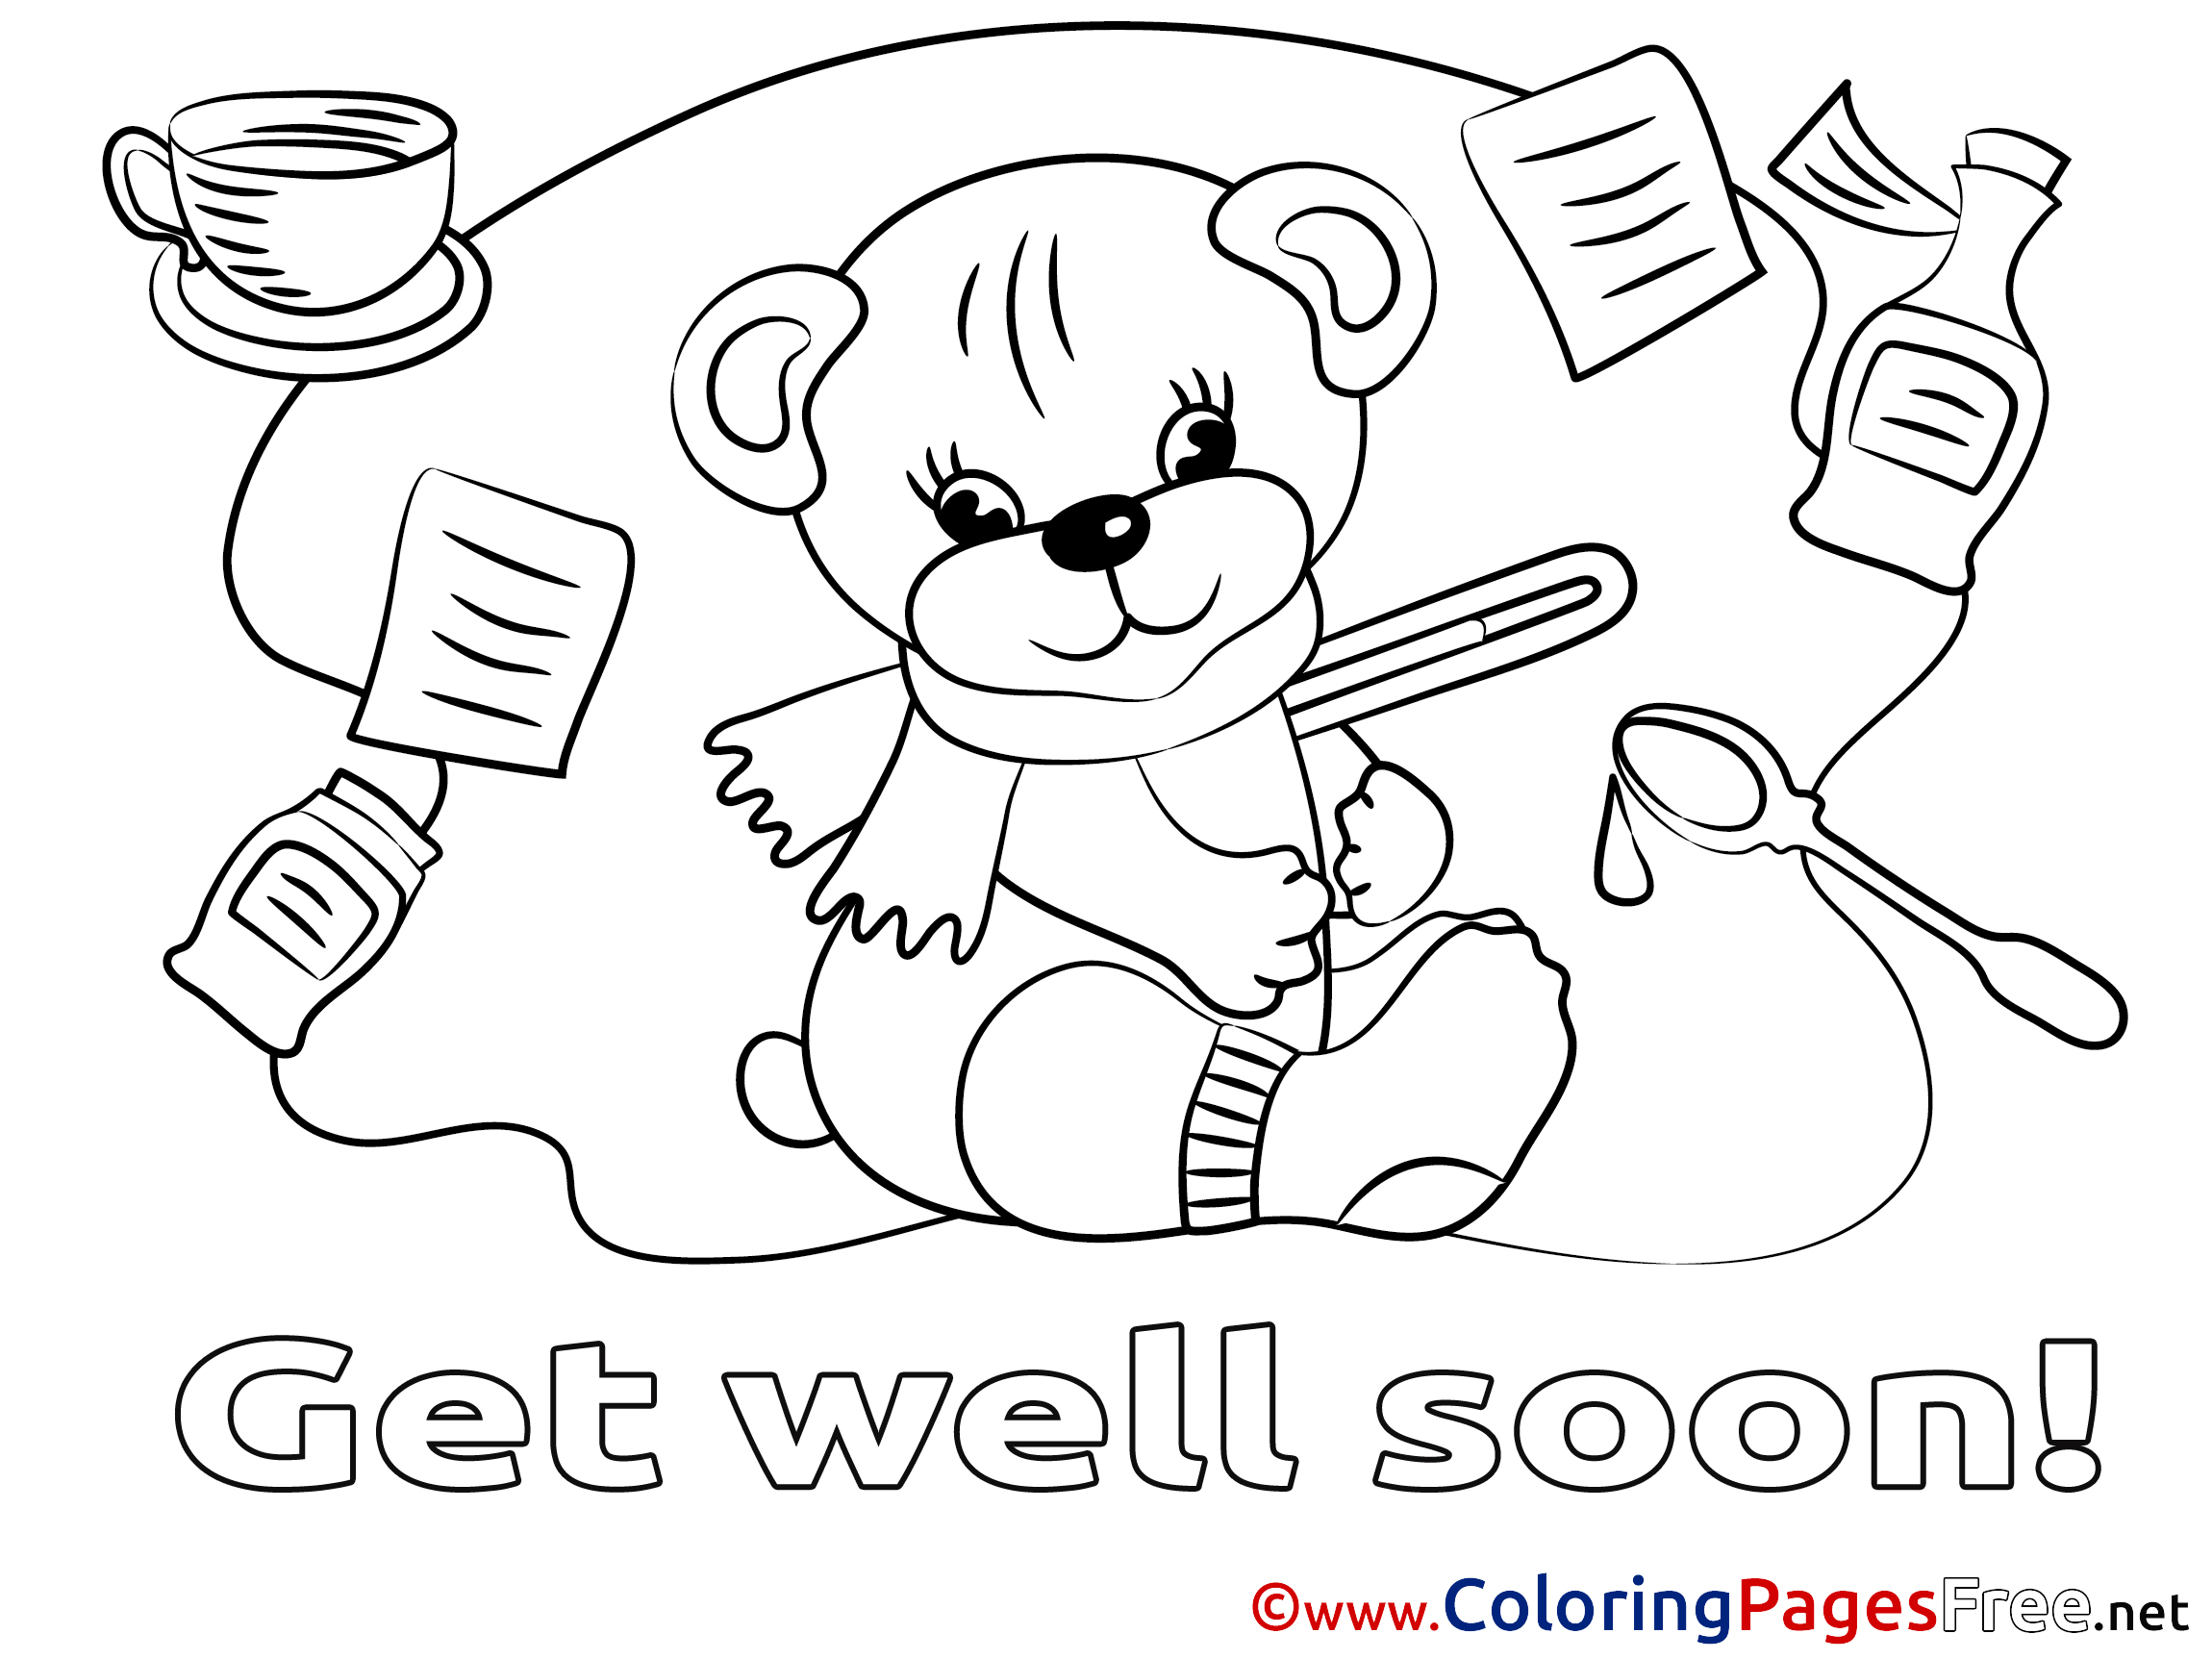 Bear Get Well Soon Coloring Page - ColoringAll